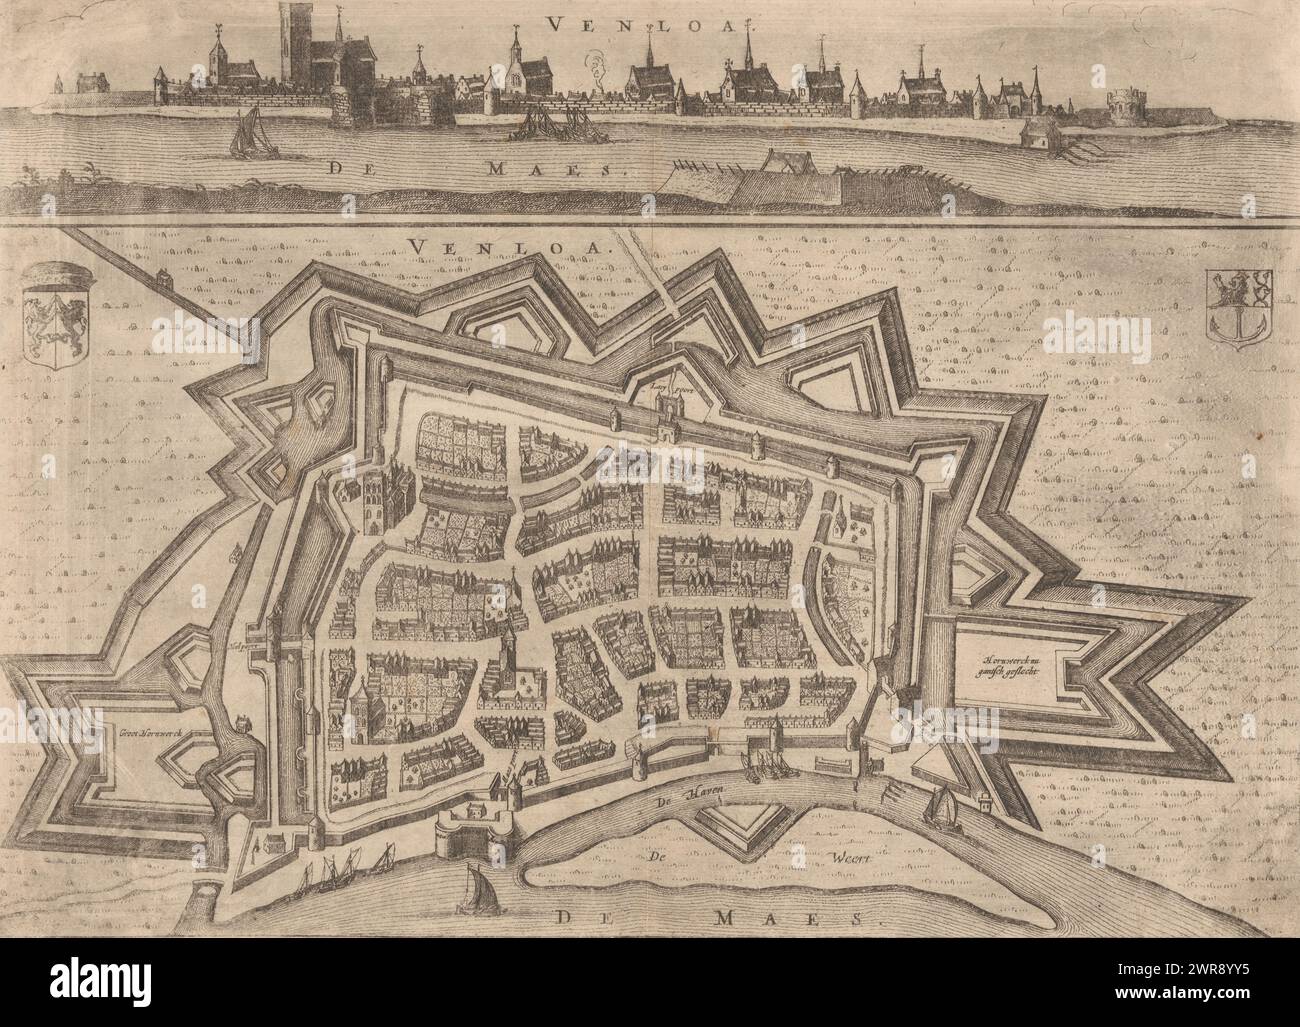 Map of Venlo, Venloa (title on object), Map of Venlo from a bird's eye view. Above the map a view of Venlo, seen from outside the city. Top left, in the map, the coat of arms of Gelre and top right the coat of arms of Venlo., print maker: Nicolaes van Geelkercken, publisher: Jacob van Biesen, Arnhem, 1653 - 1672, paper, etching, engraving, height 251 mm × width 346 mm, print Stock Photo